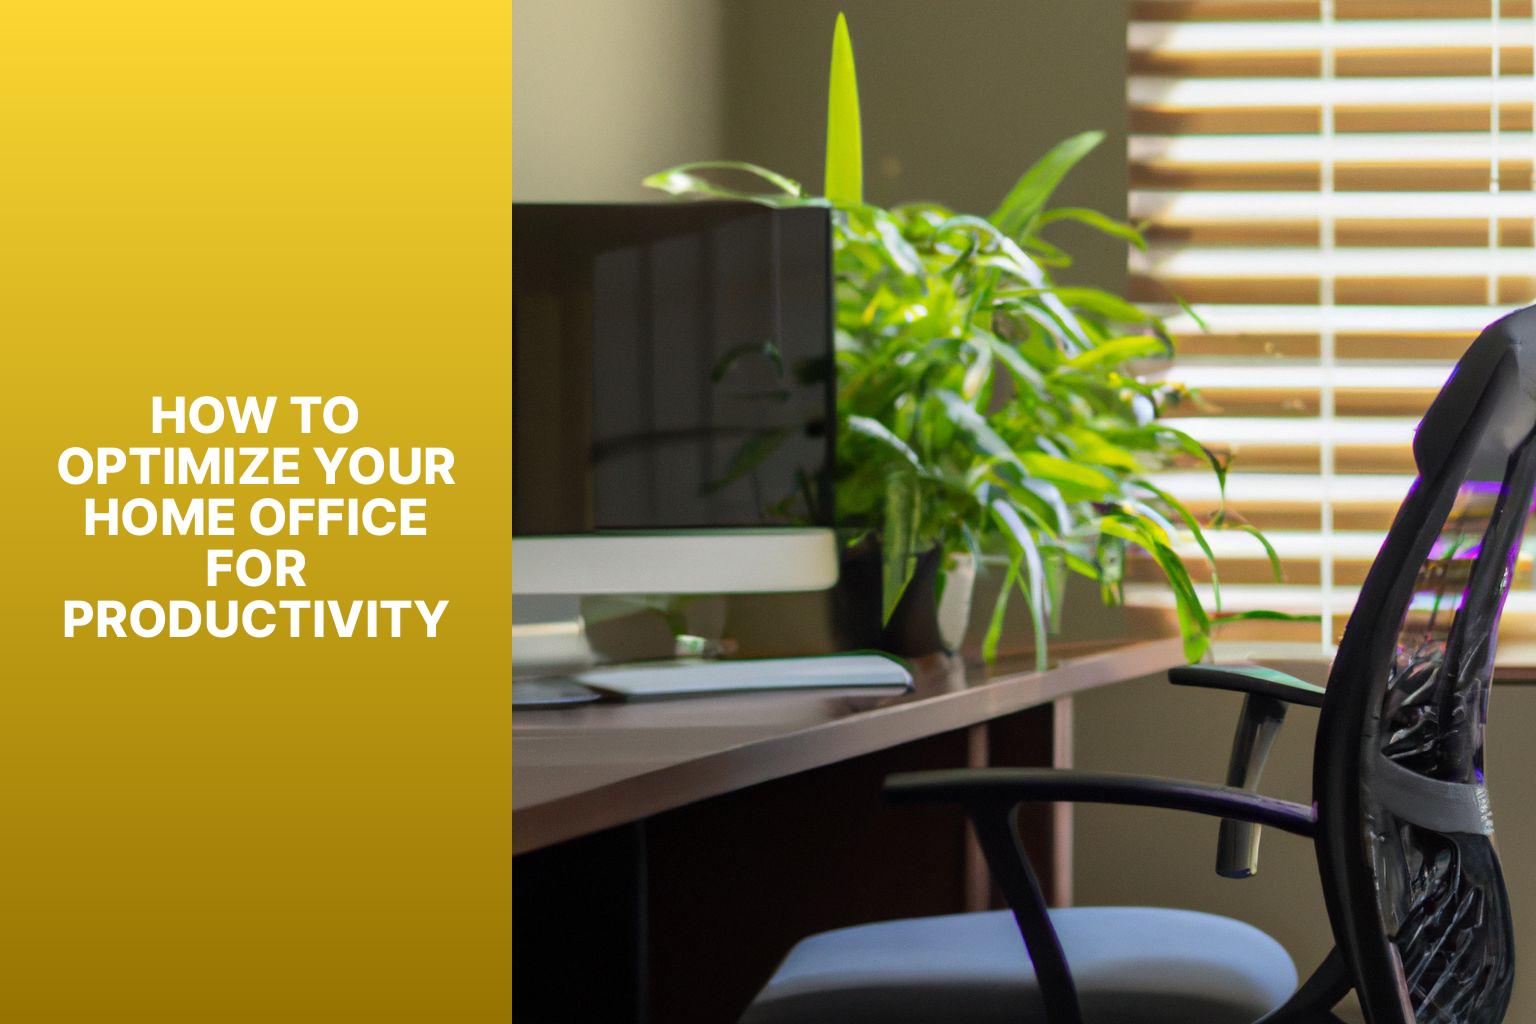 How to Optimize Your Home Office for Productivity